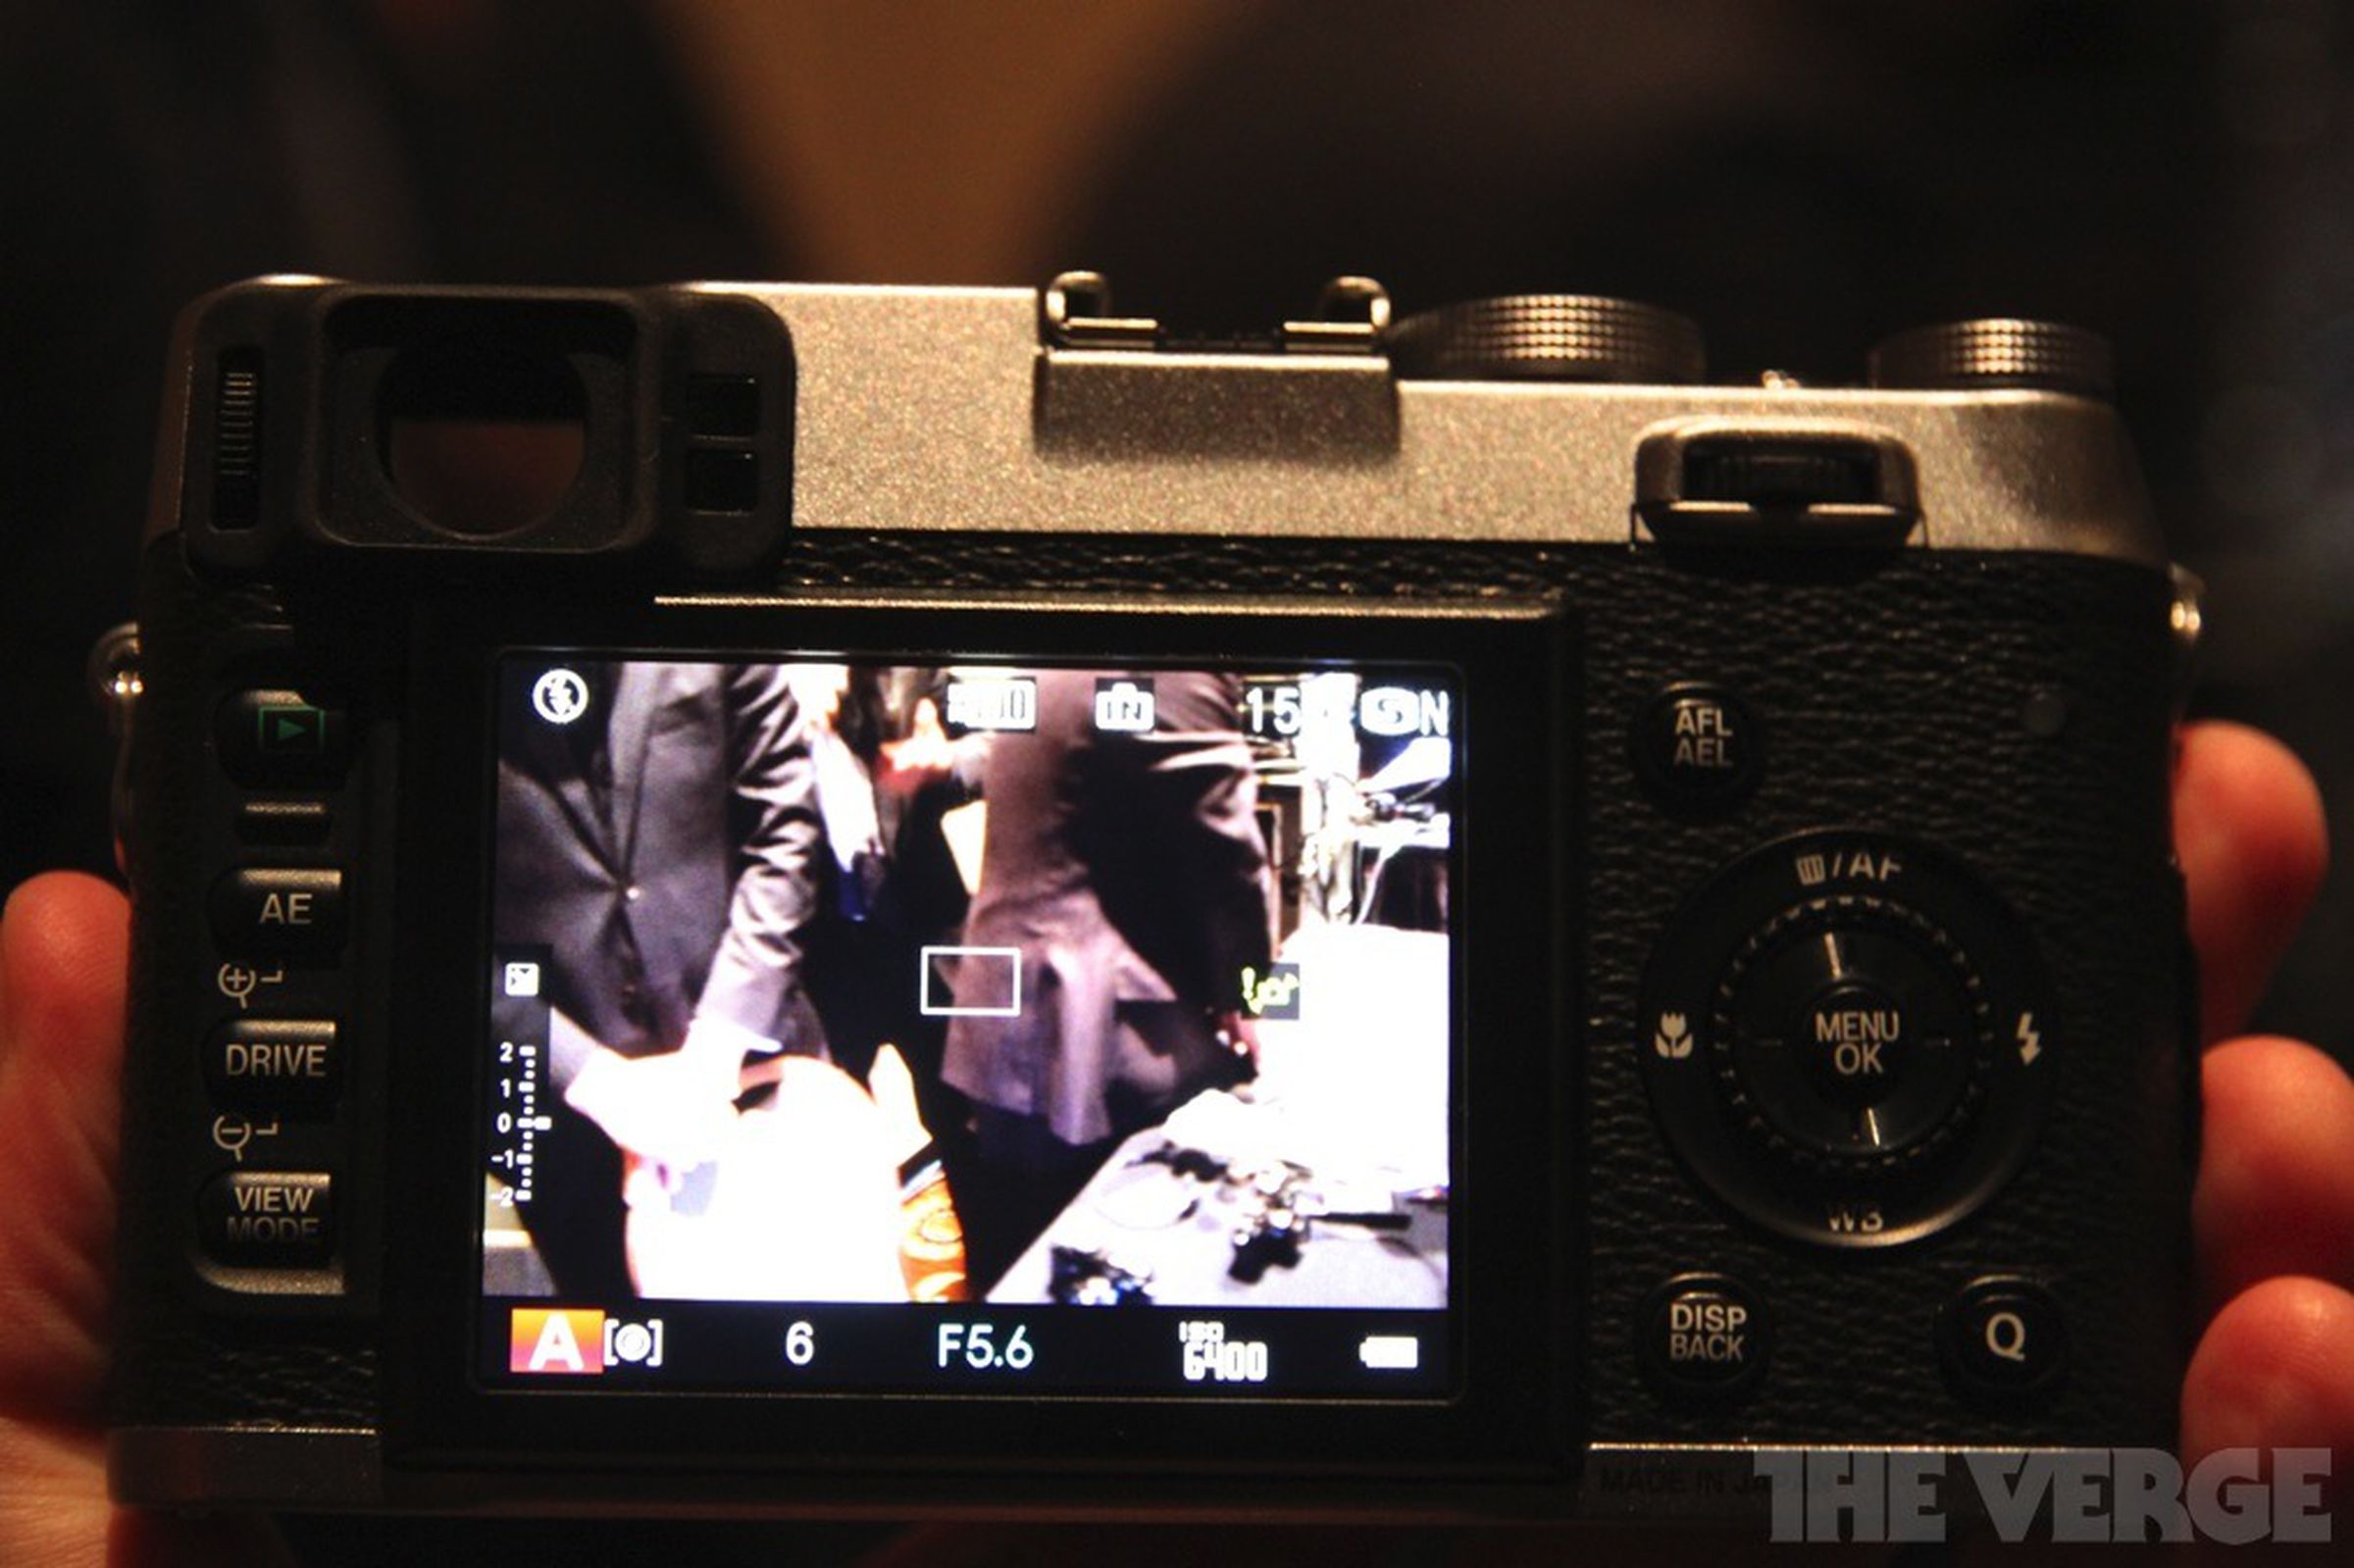 Fujifilm X100s and X20 hands-on photos